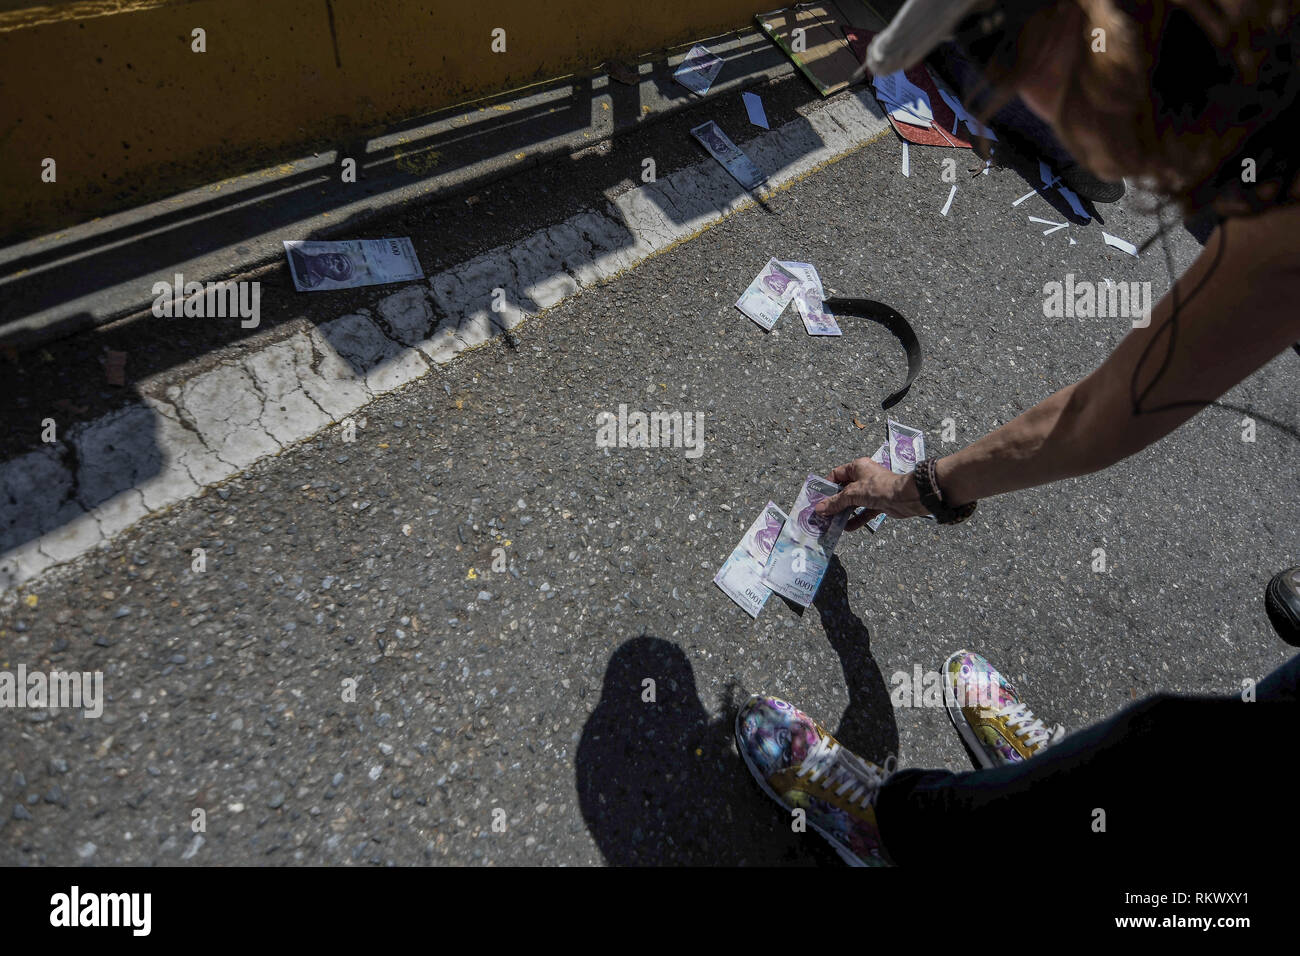 A woman seen picking up thrown banknote during a protest to call for a change in the government. Opponents gather at a protest organised by the PSUV (United Socialist Party of Venezuela) after the call from interim president Juan Guaido, to show their support to him, while asking the army to allow more humanitarian aids into the country. Stock Photo